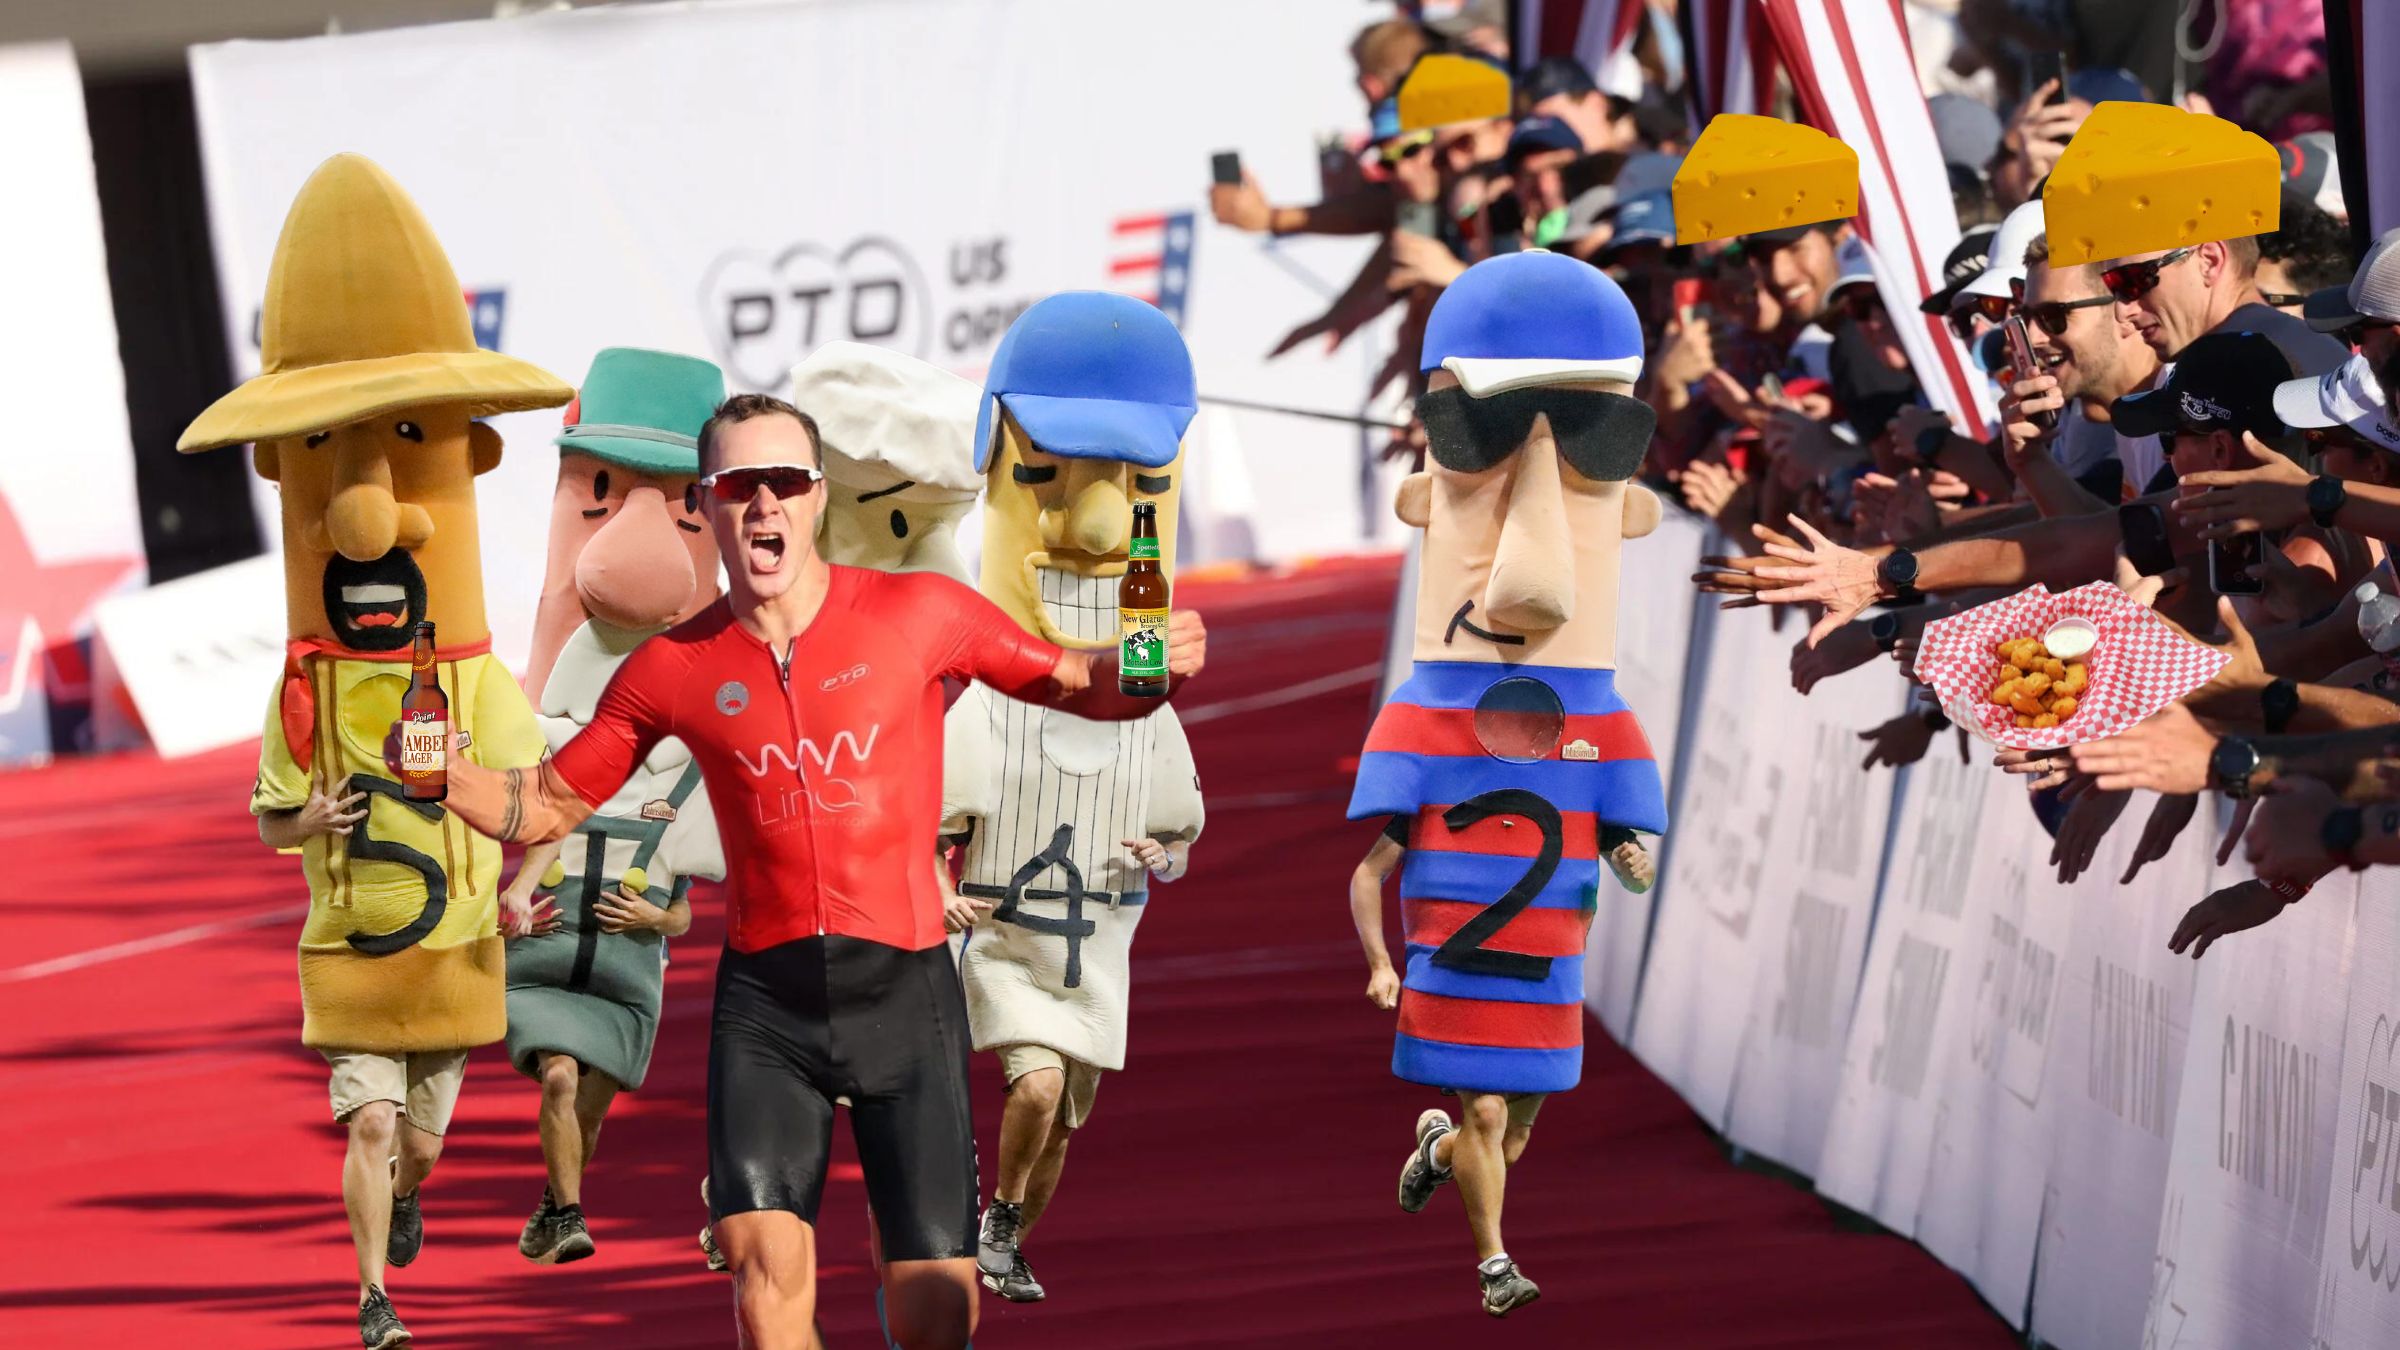 You can help decide where the Racing Sausages race this year